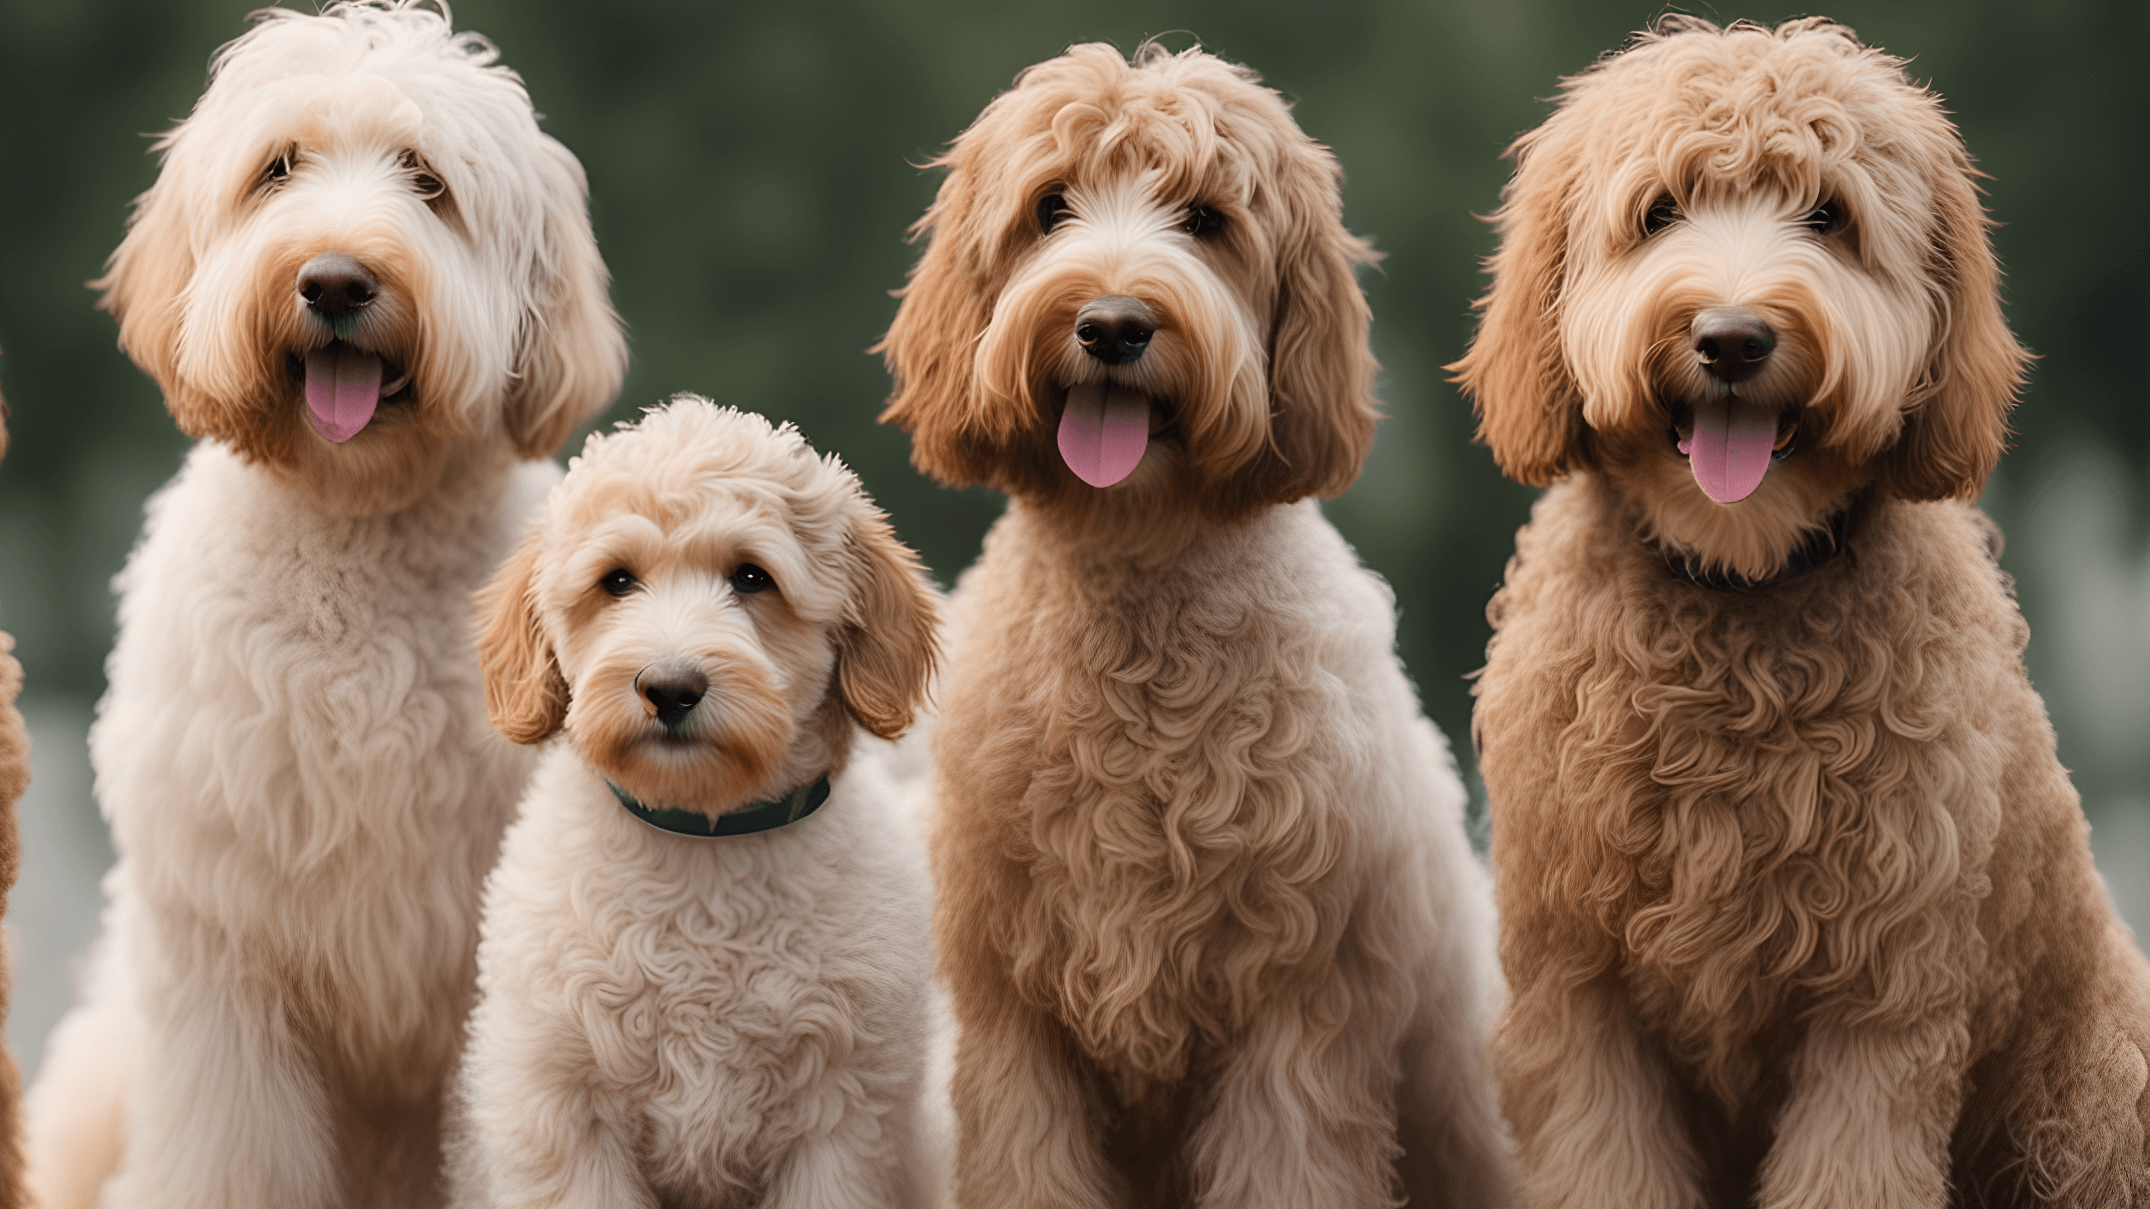 Various Labradoodles showcasing different coat types, from curly to wavy to straight